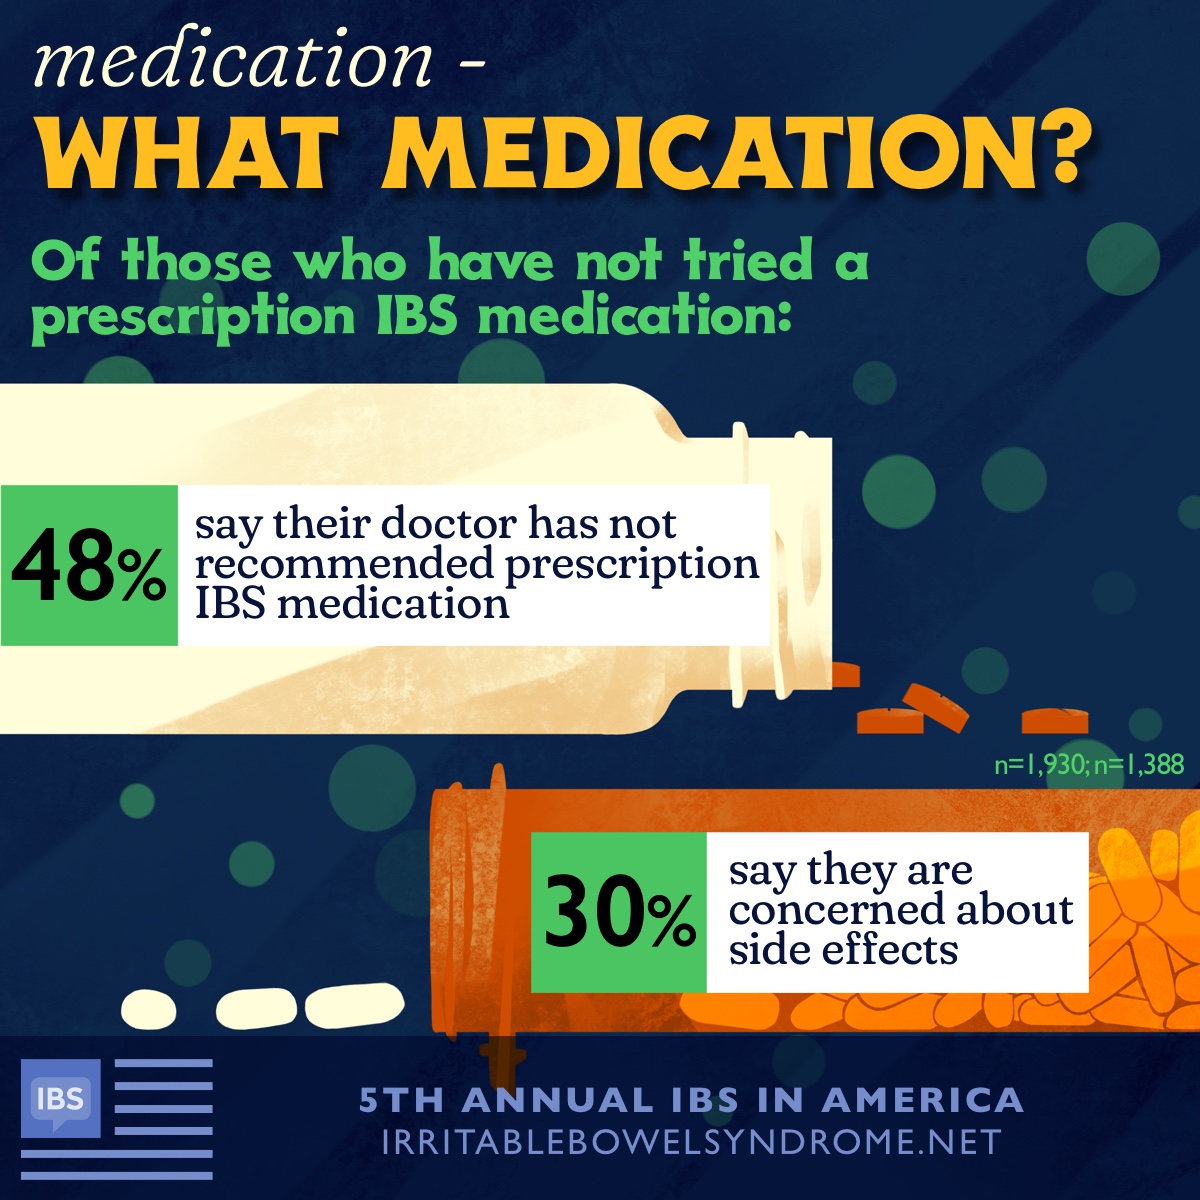 Infographic featuring data on medication: 48% say their doctor has not recommended prescription IBS medication; 30% say they are concerned about side effects.